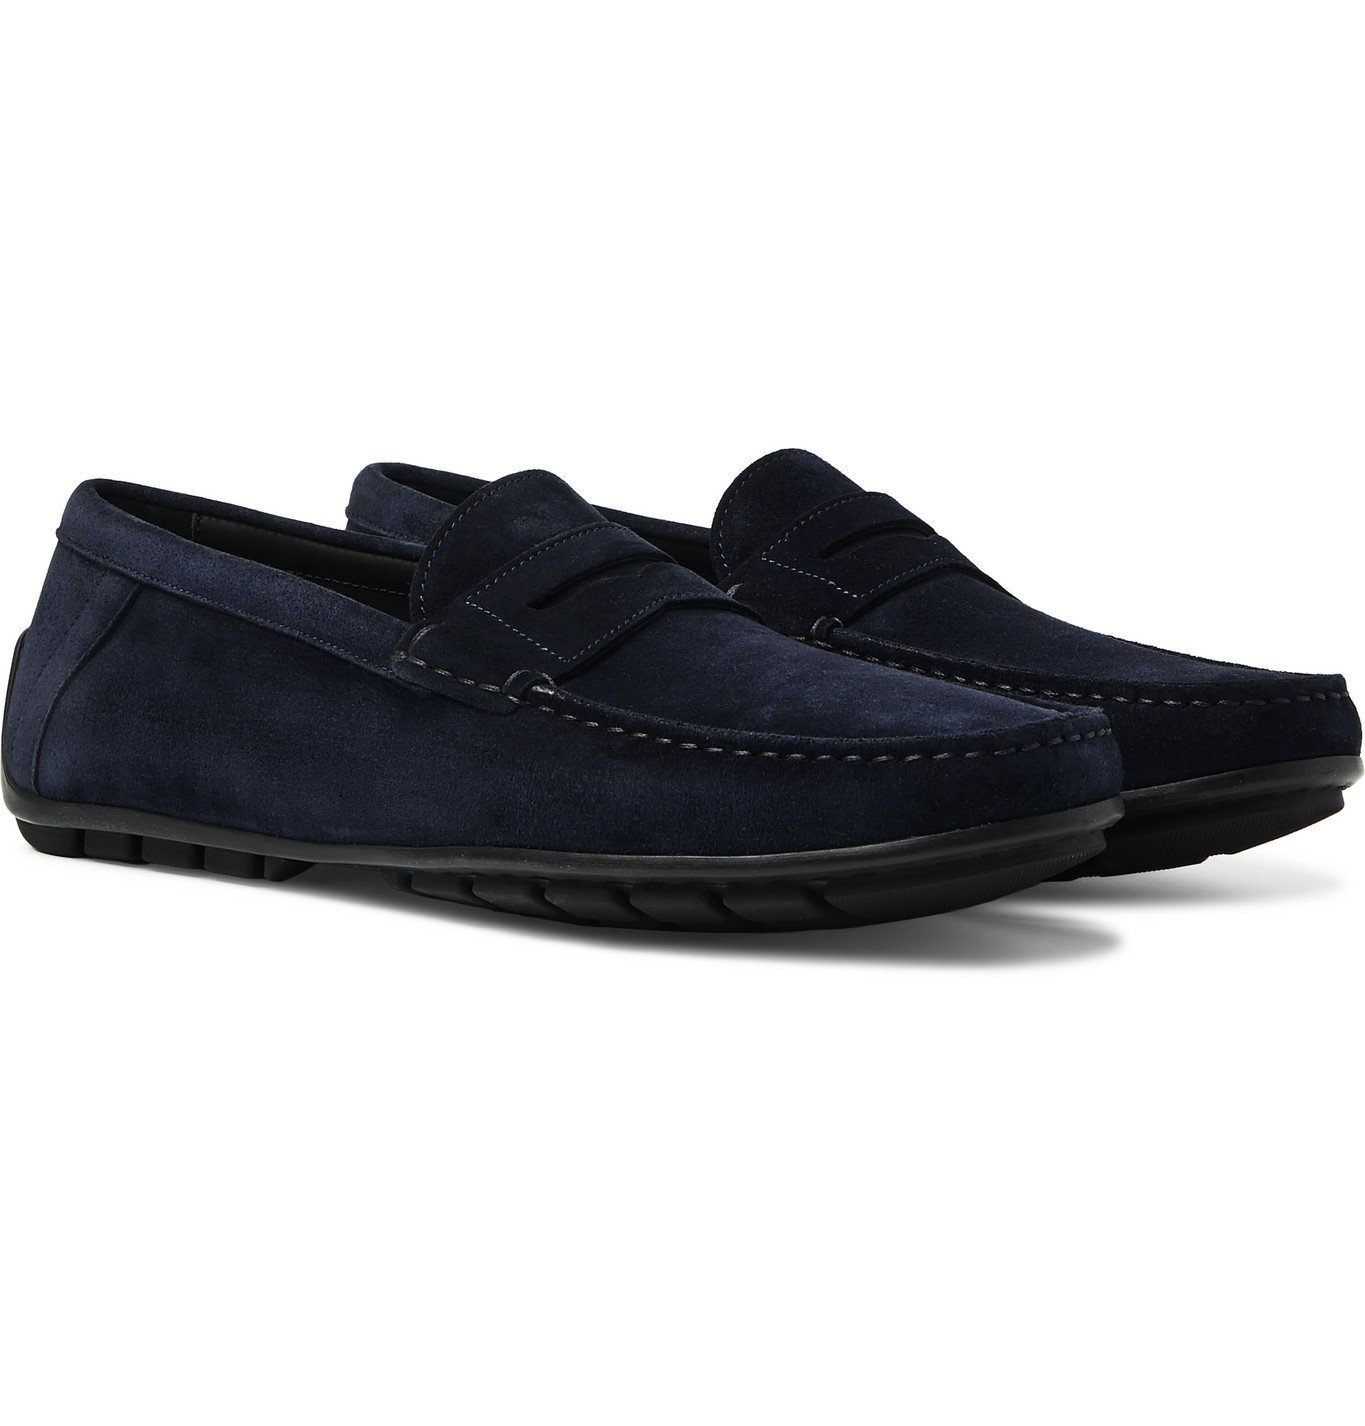 J.M Weston Ajaccio Suede Driving Shoes in Blue for Men Mens Shoes Slip-on shoes Loafers 